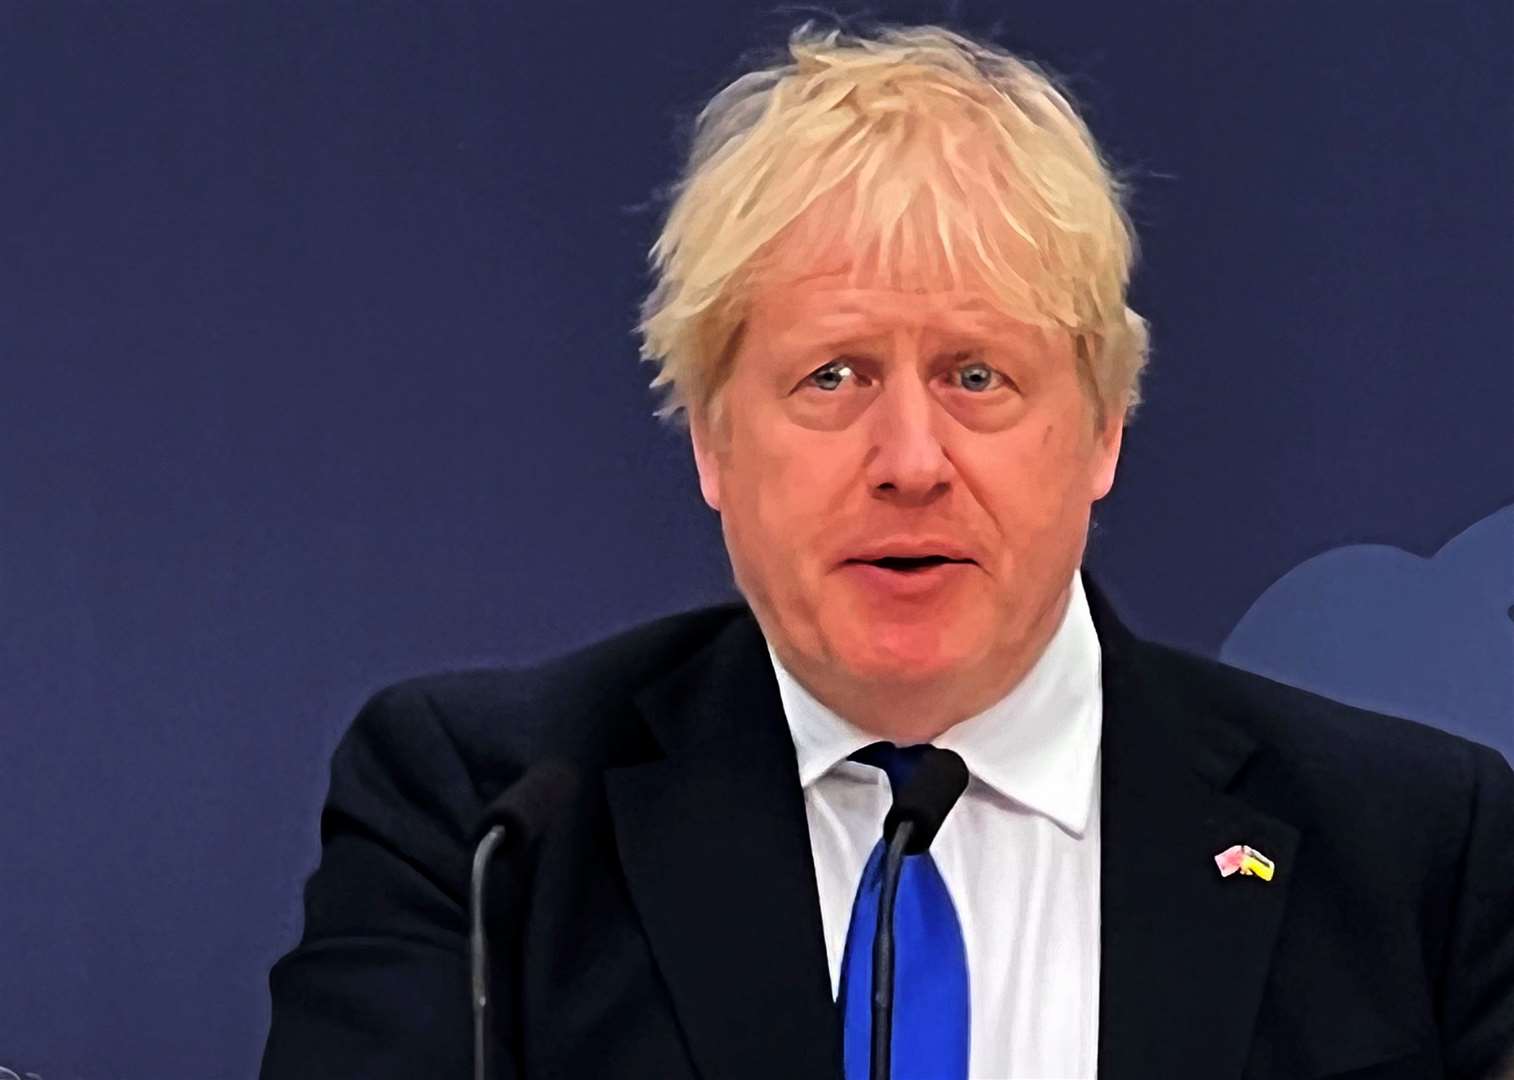 Former Prime Minister Boris Johnson ‘is synonymous with Brexit’